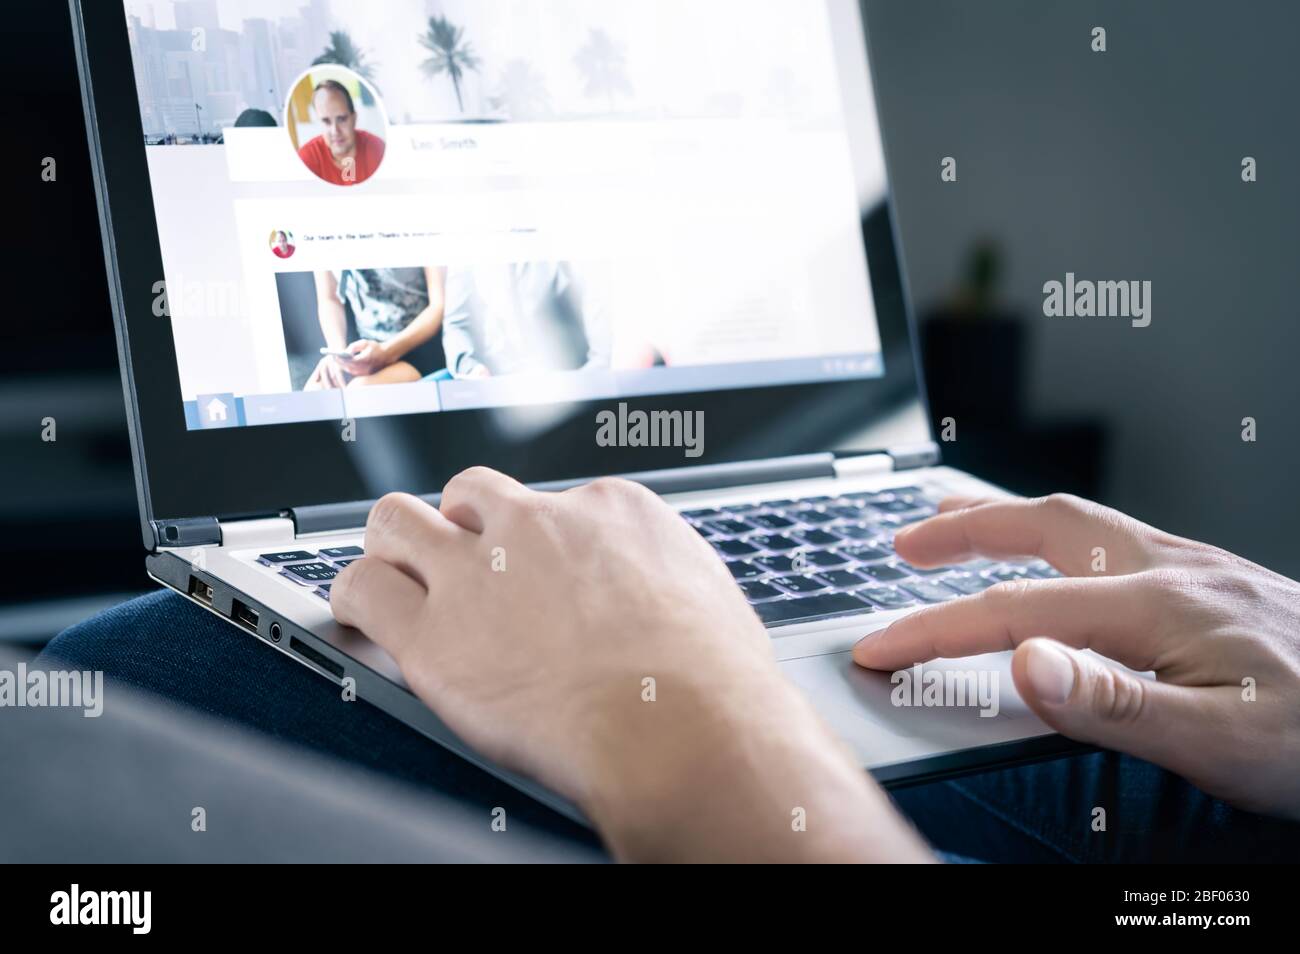 Social media website. Networking site in laptop screen with profile photo, shared posts and status updates. Personal branding concept. Stock Photo